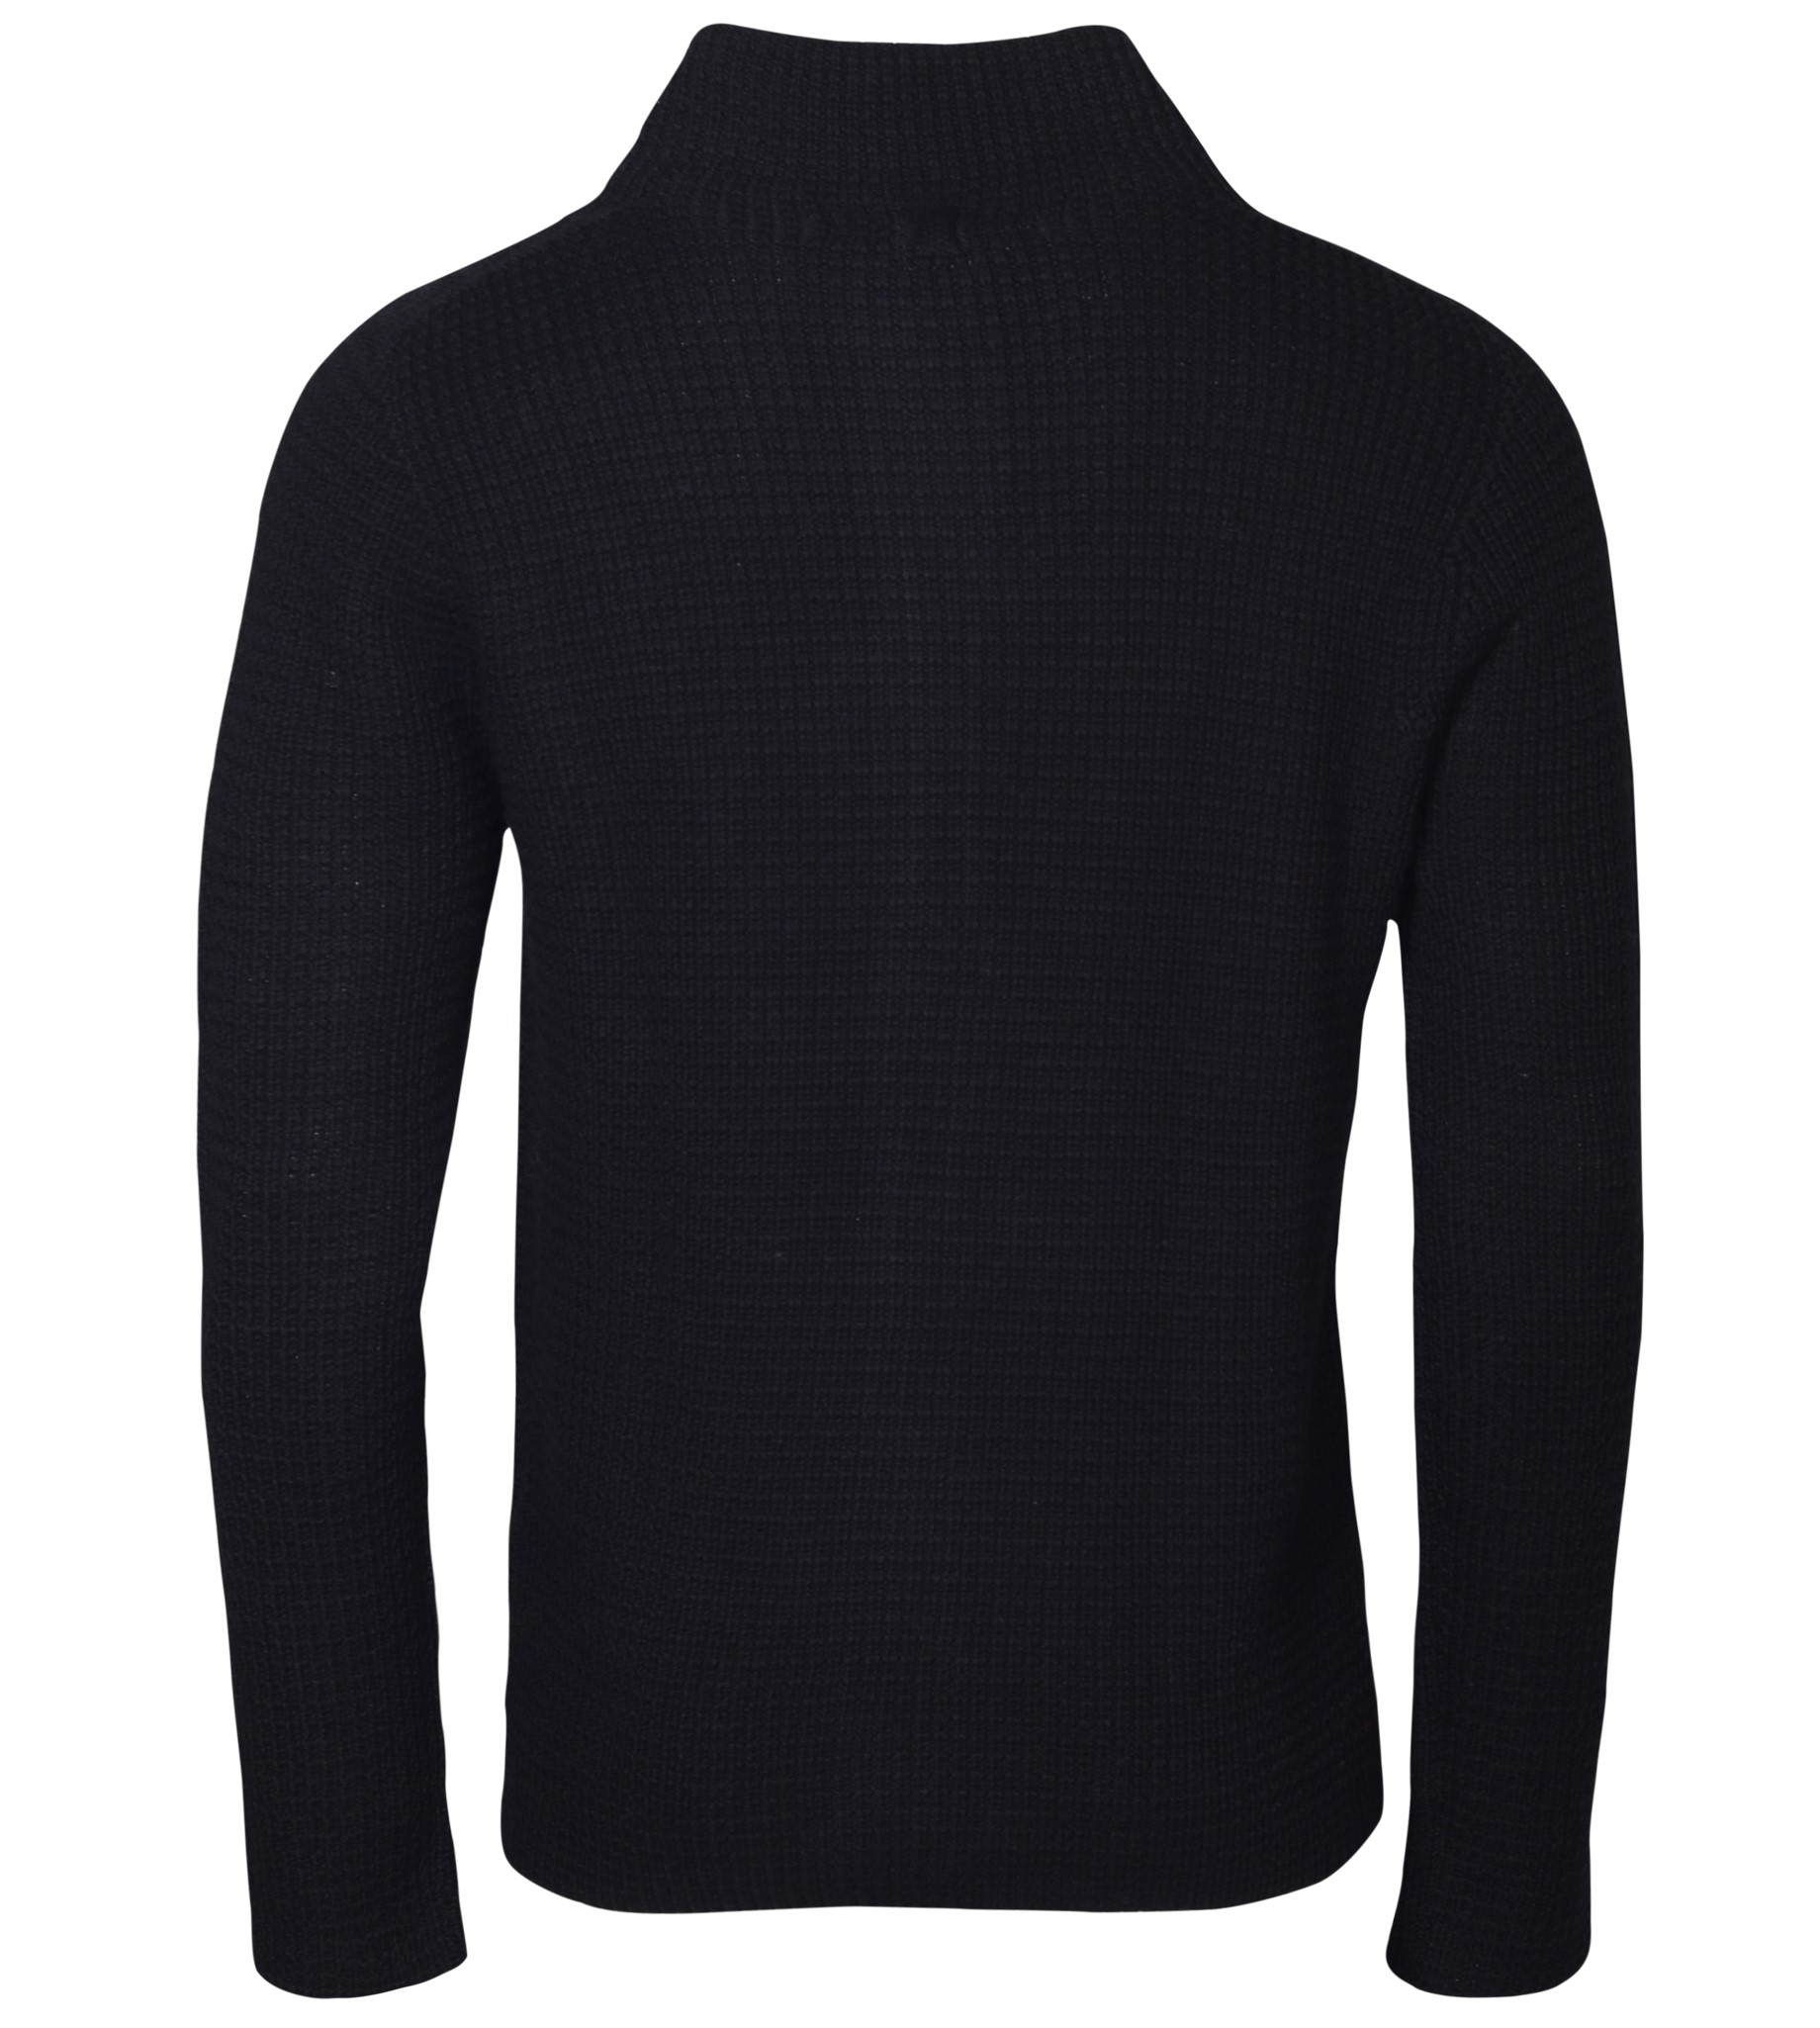 HANNES ROETHER Knit Cardigan in Black